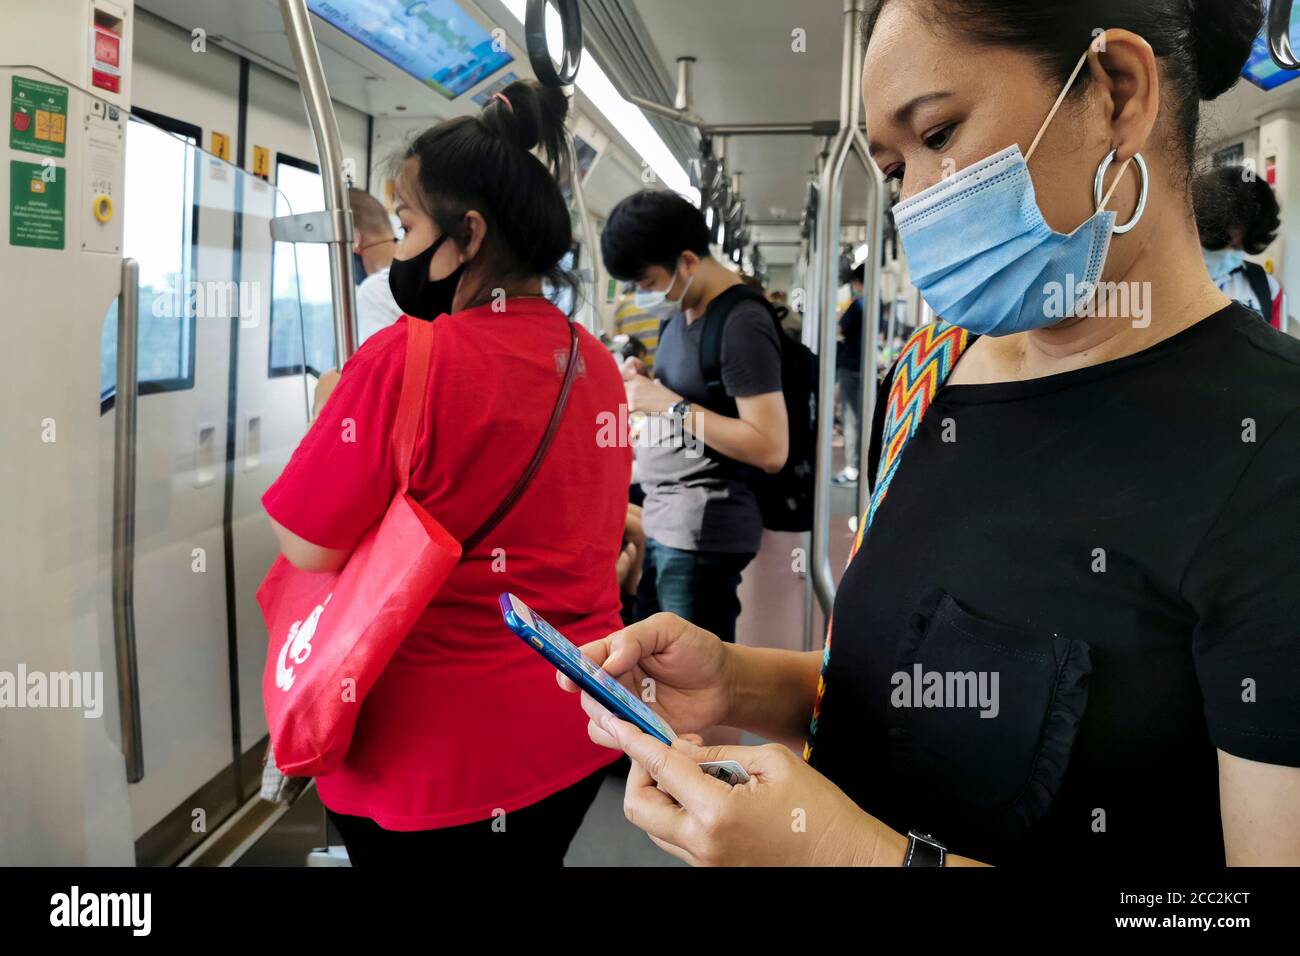 Bangkok, Thailand - August 2, 2020 : asian passengers in sky train public transport wearing hygiene face mask going to work and checking pandemic news Stock Photo